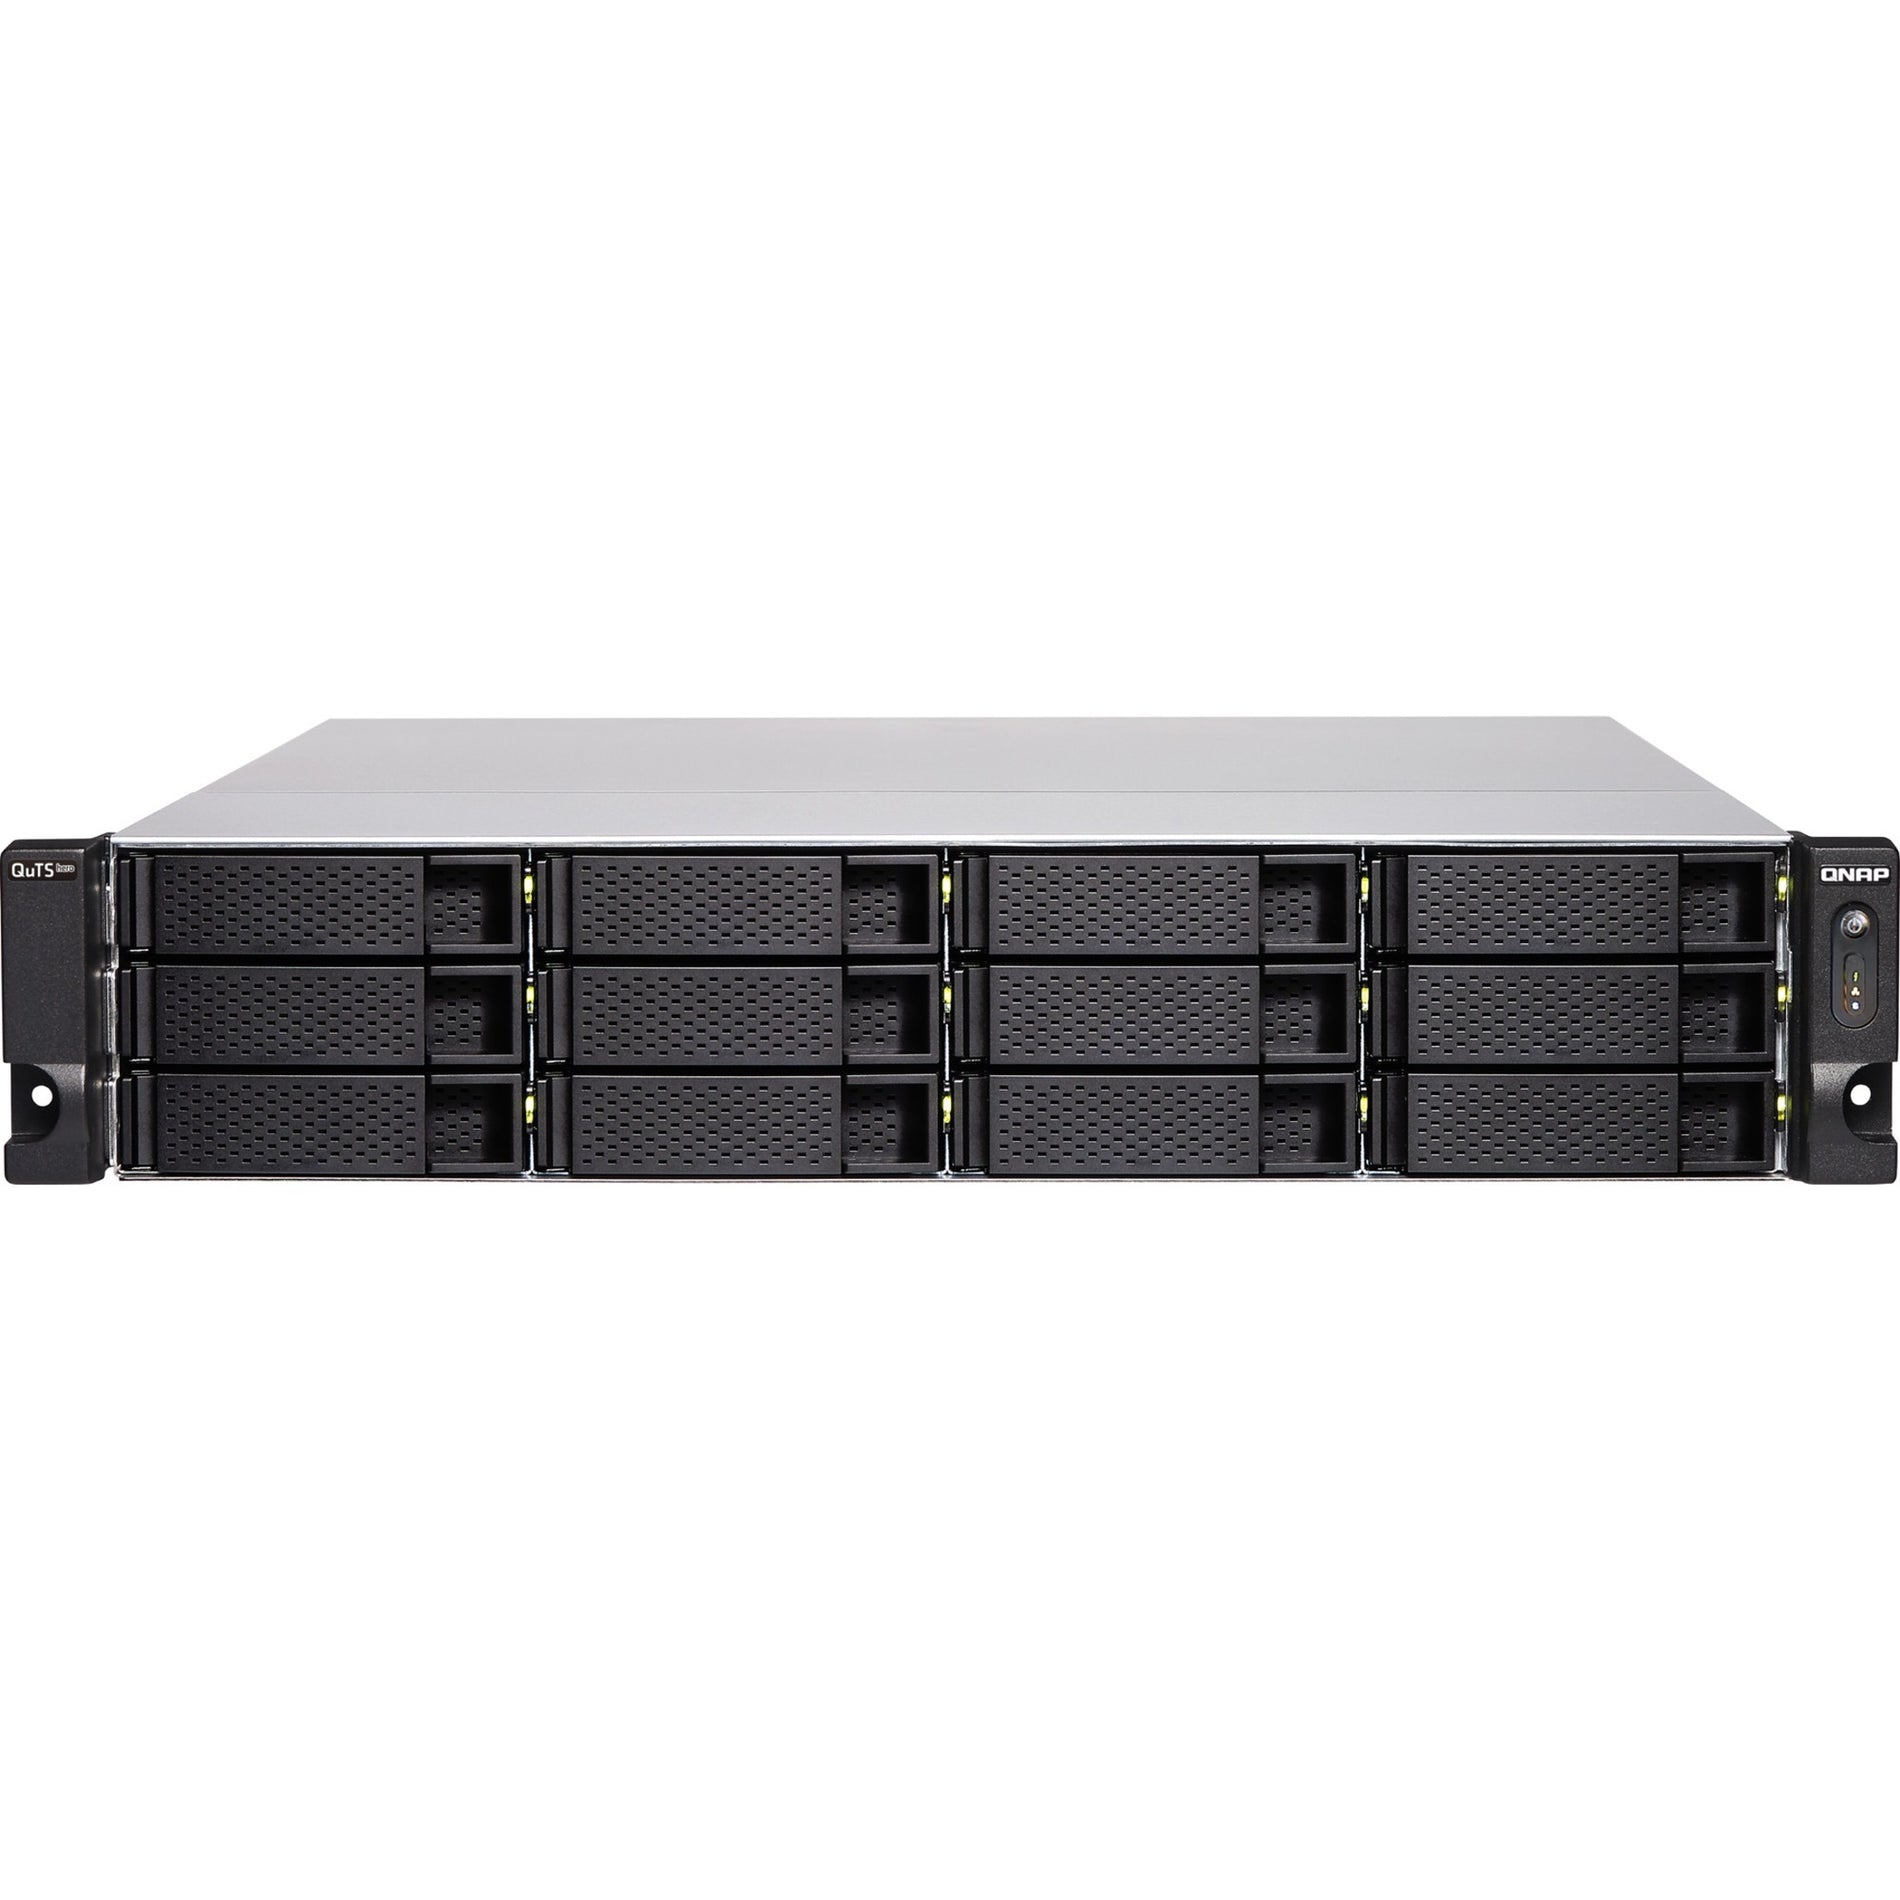 QNAP TS-H1886XU-RP-R2-D1622-32G SAN/NAS Storage System, 2U Rack-mountable, 32GB DDR4 RAM, 12 HDD/18 SSD Support